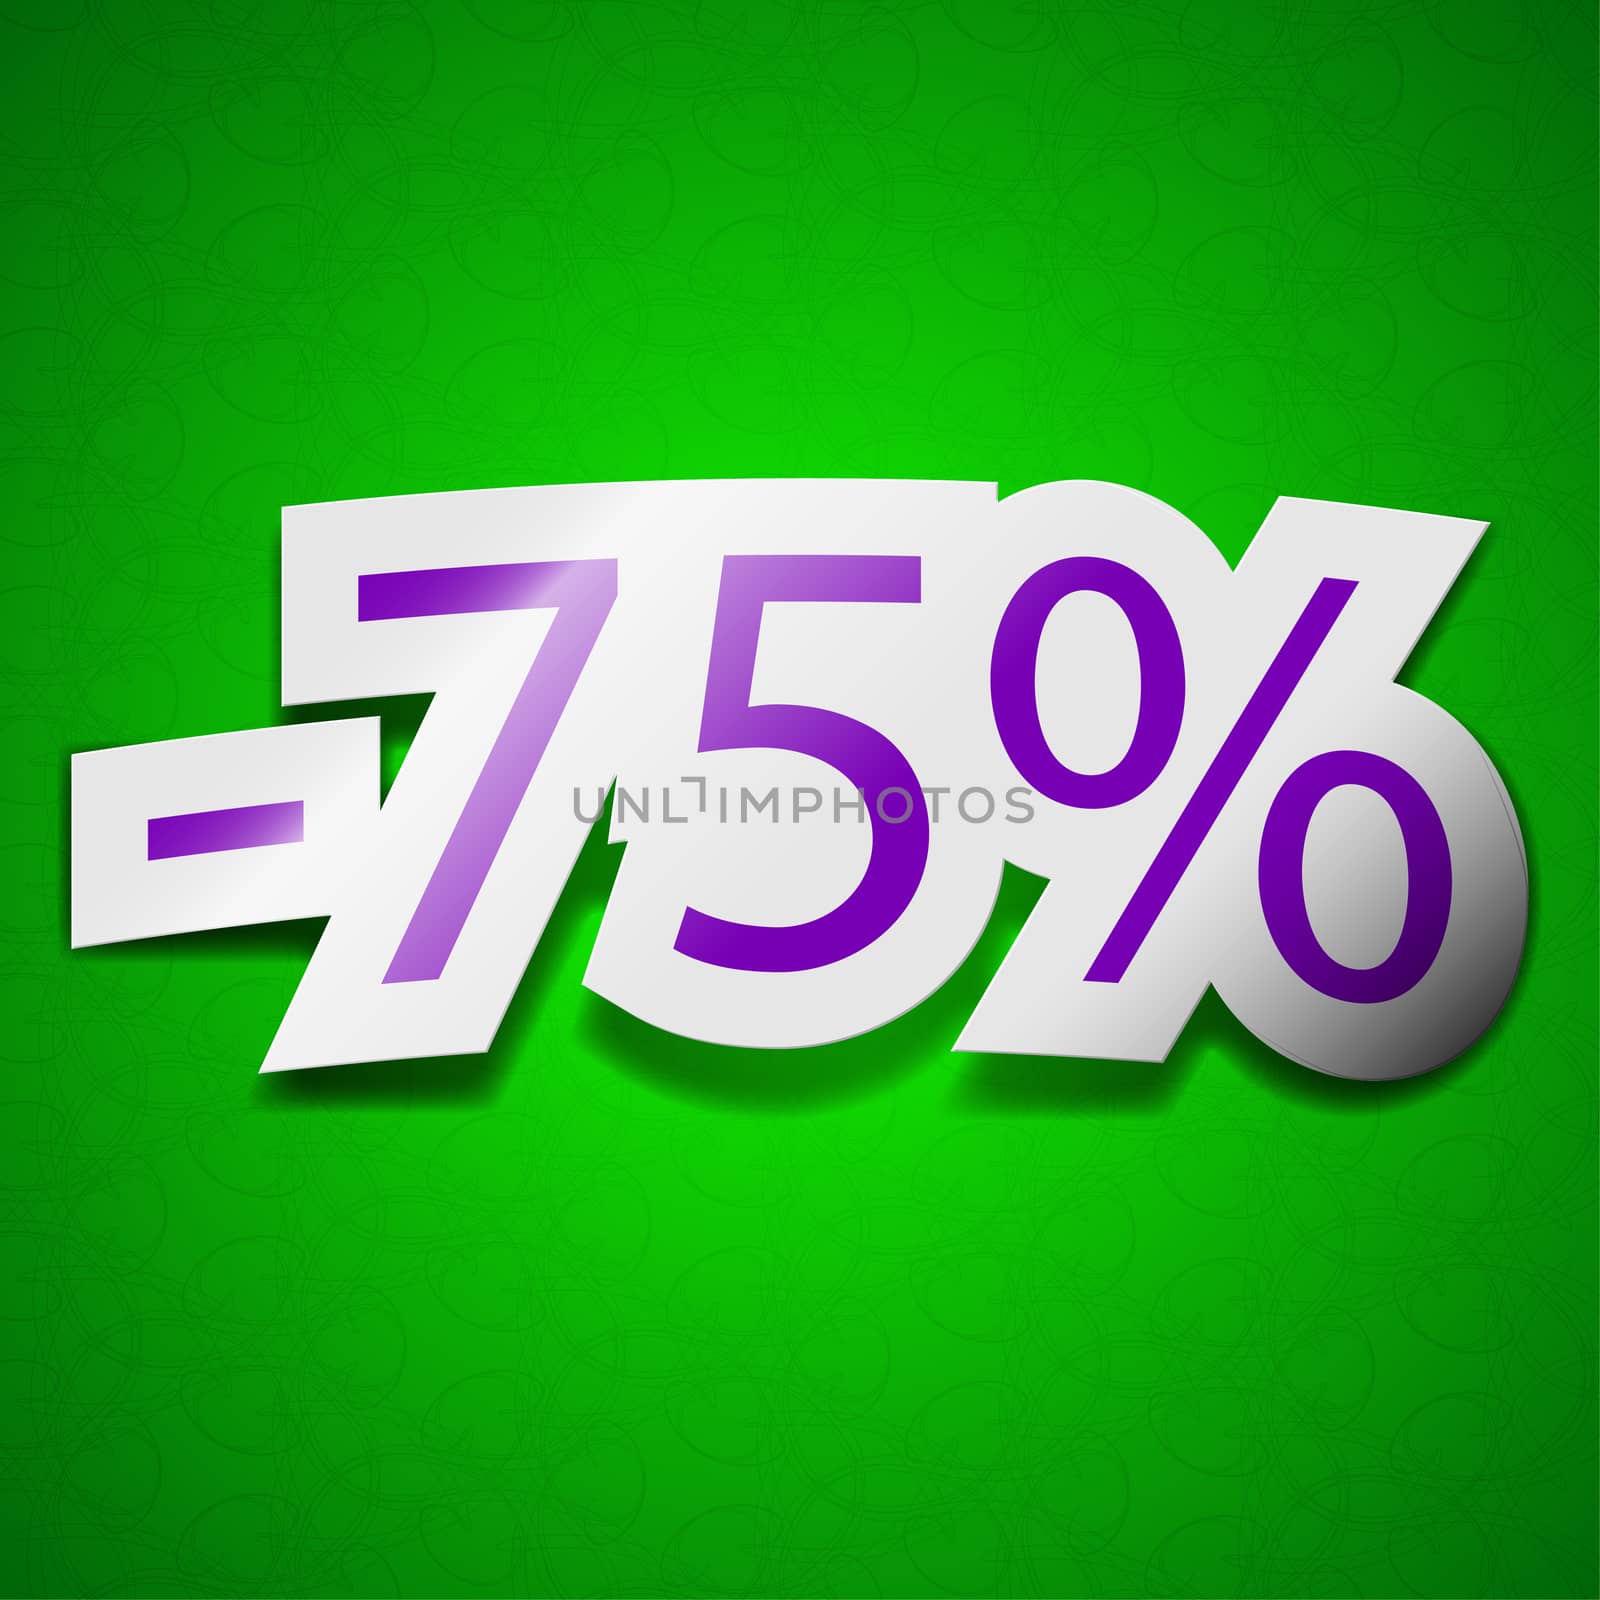 75 percent discount icon sign. Symbol chic colored sticky label on green background.  illustration